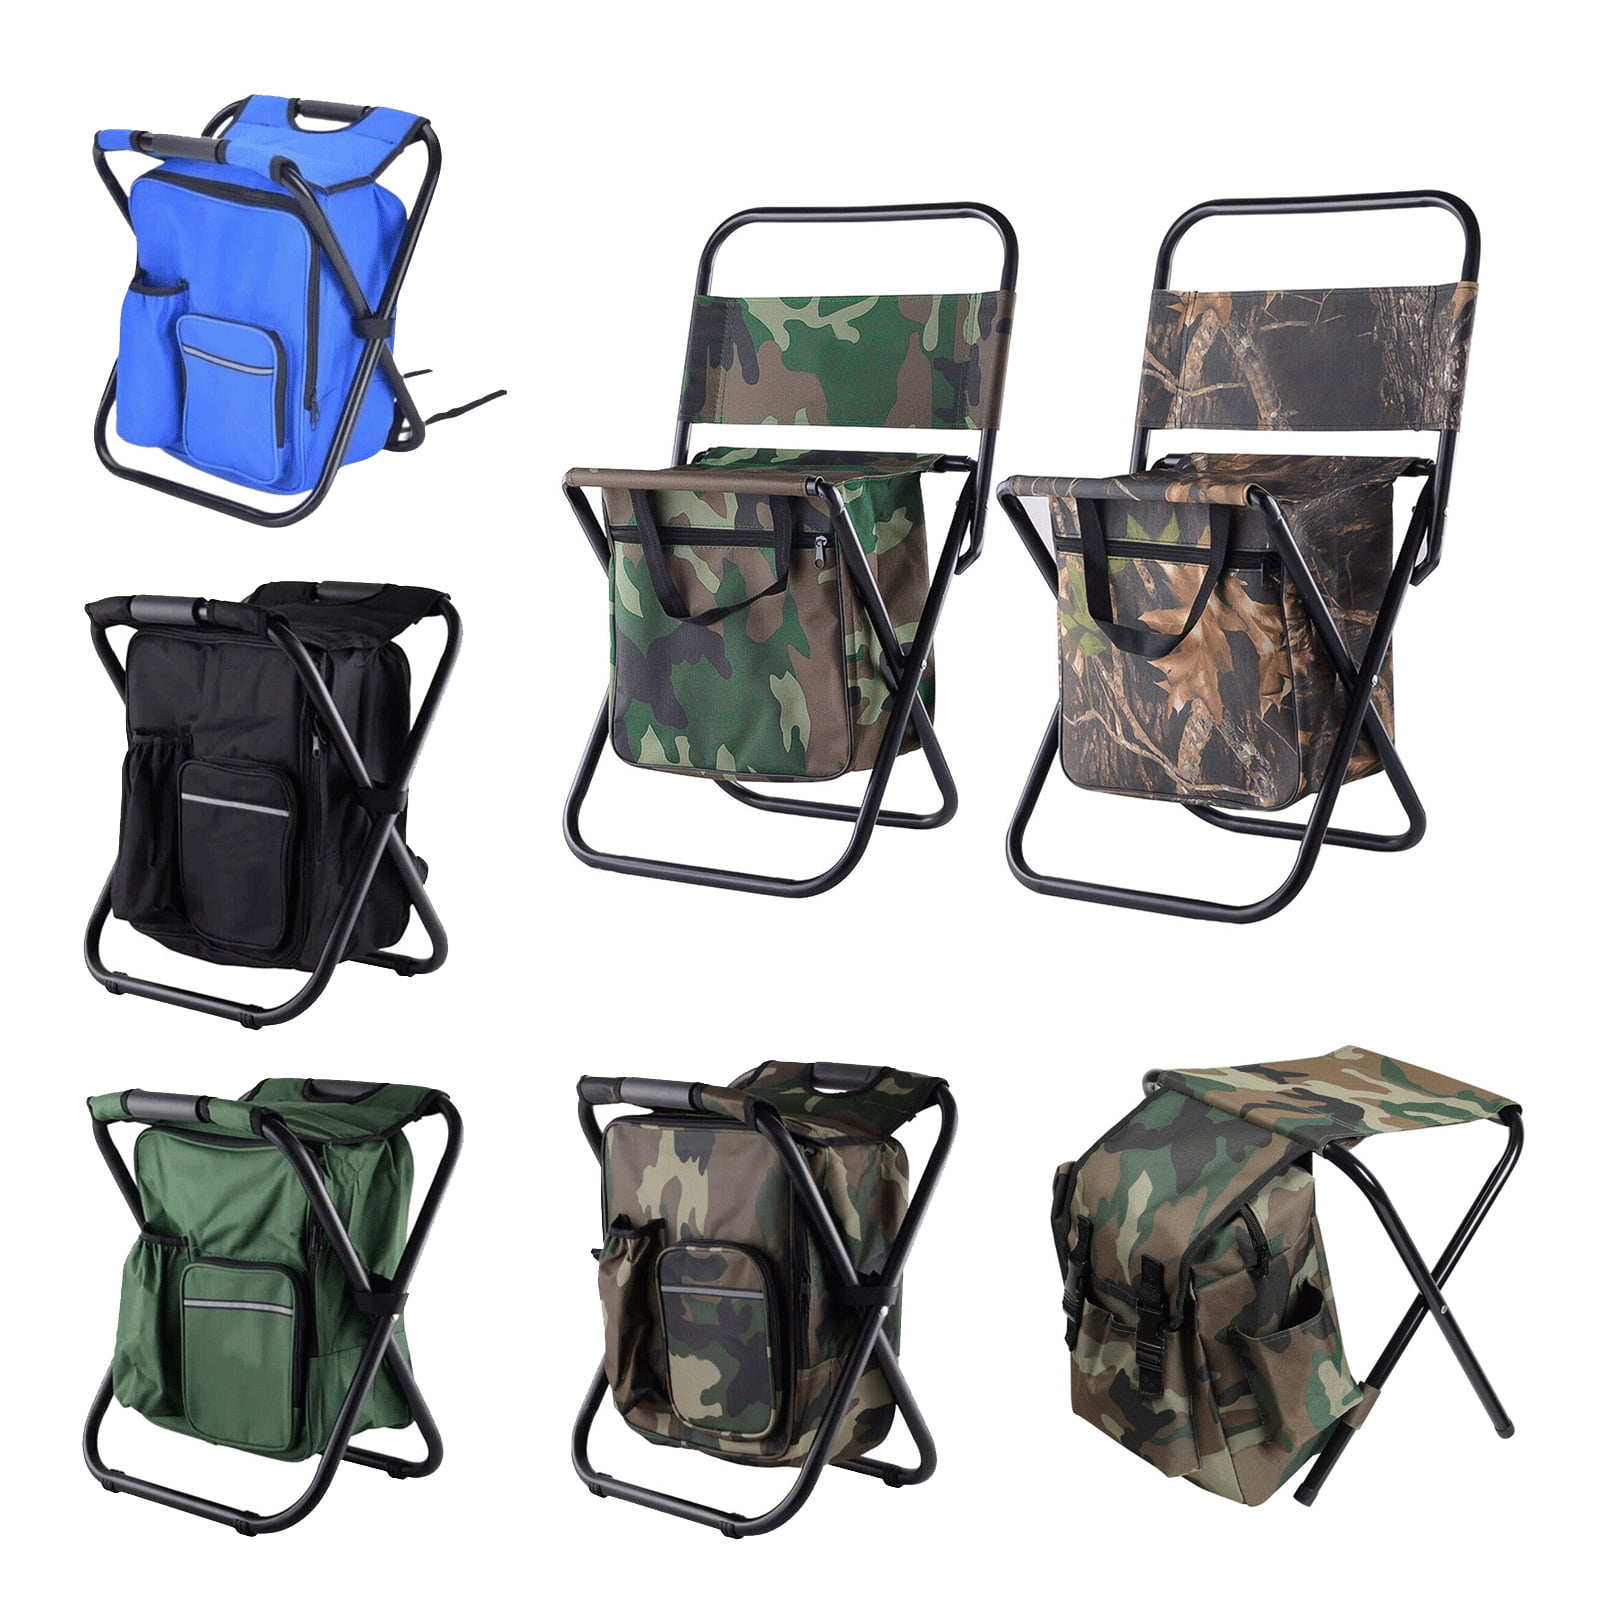 Portable Backpack Chair, Folding Fishing Cooler Backpack Stool for